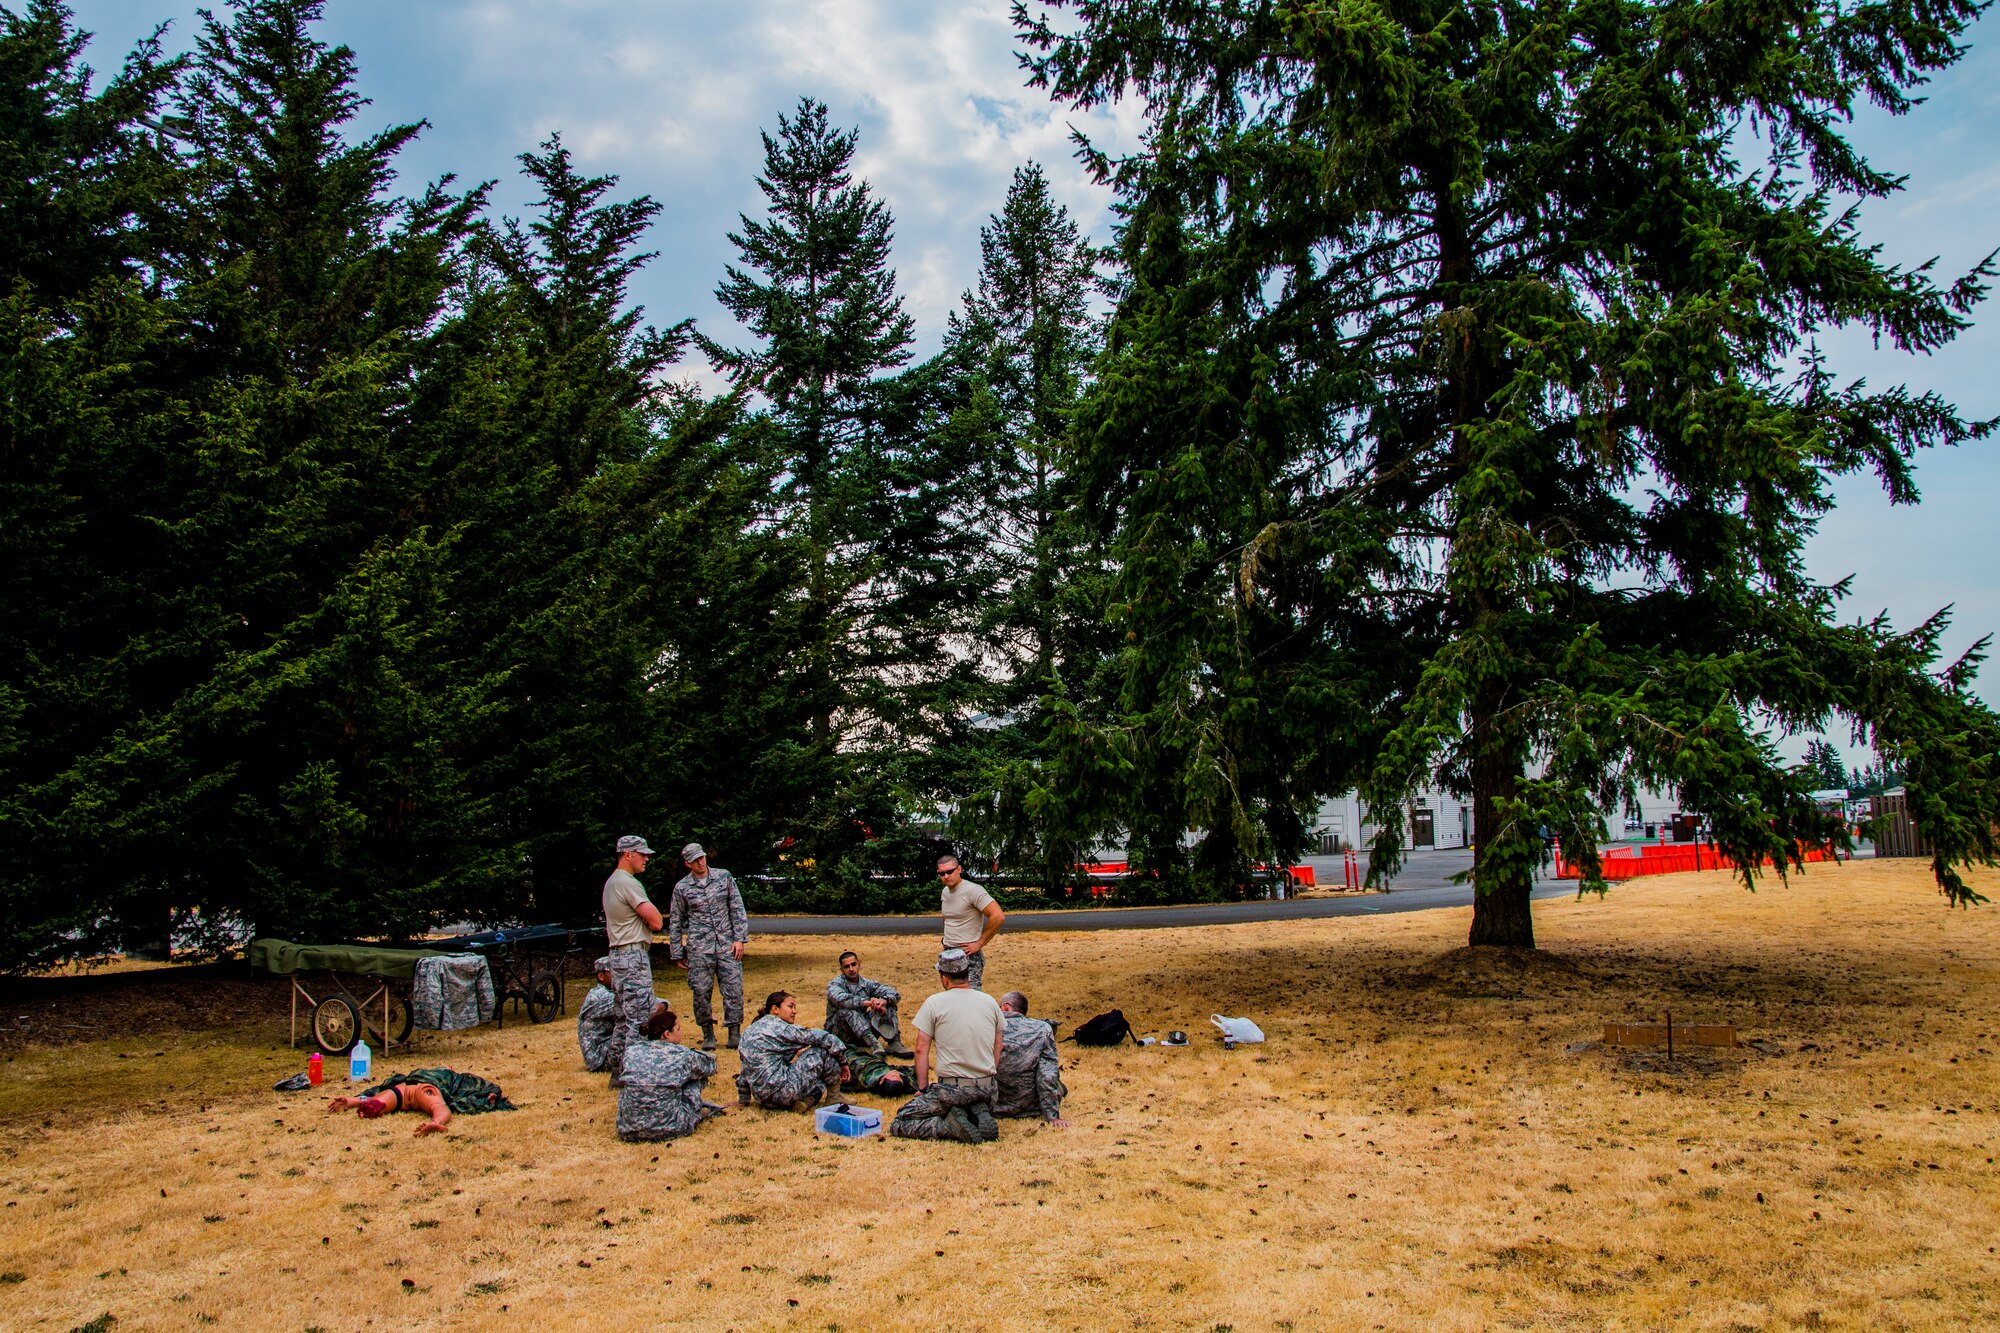 Medics from the 446th Aeromedical Staging Squadron gather to train on various medical procedures in preparation for the annual Expert Field Medical Badge test at McChord Field, Wash., Aug. 2, 2015. The Expert Field Medical Badge is a unique distinction worn only by the most battle-ready and elite medical personnel in the military. Every year at Joint Base Lewis-McChord, Wash., a  two-week intensive testing event is set up to qualify eligible service members from around the country for the right to wear the coveted badge. (U.S. Air Force photo by Senior Airman Daniel Liddicoet)